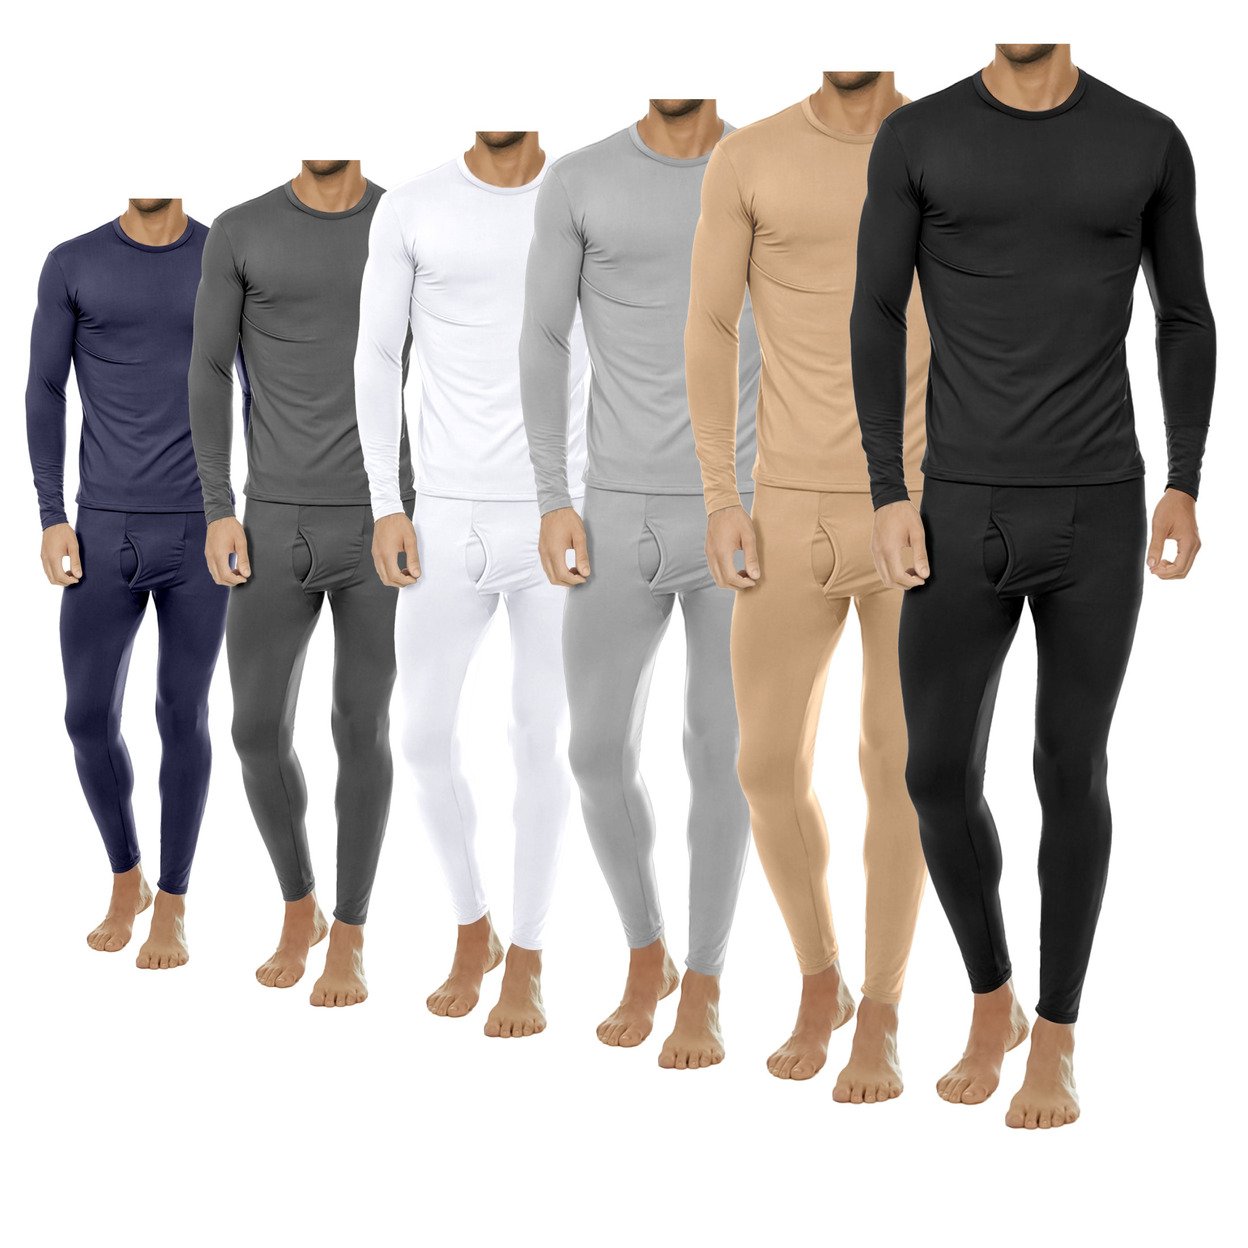 2-Sets: Men's Winter Warm Fleece Lined Thermal Underwear Set For Cold Weather - Grey&white, Small